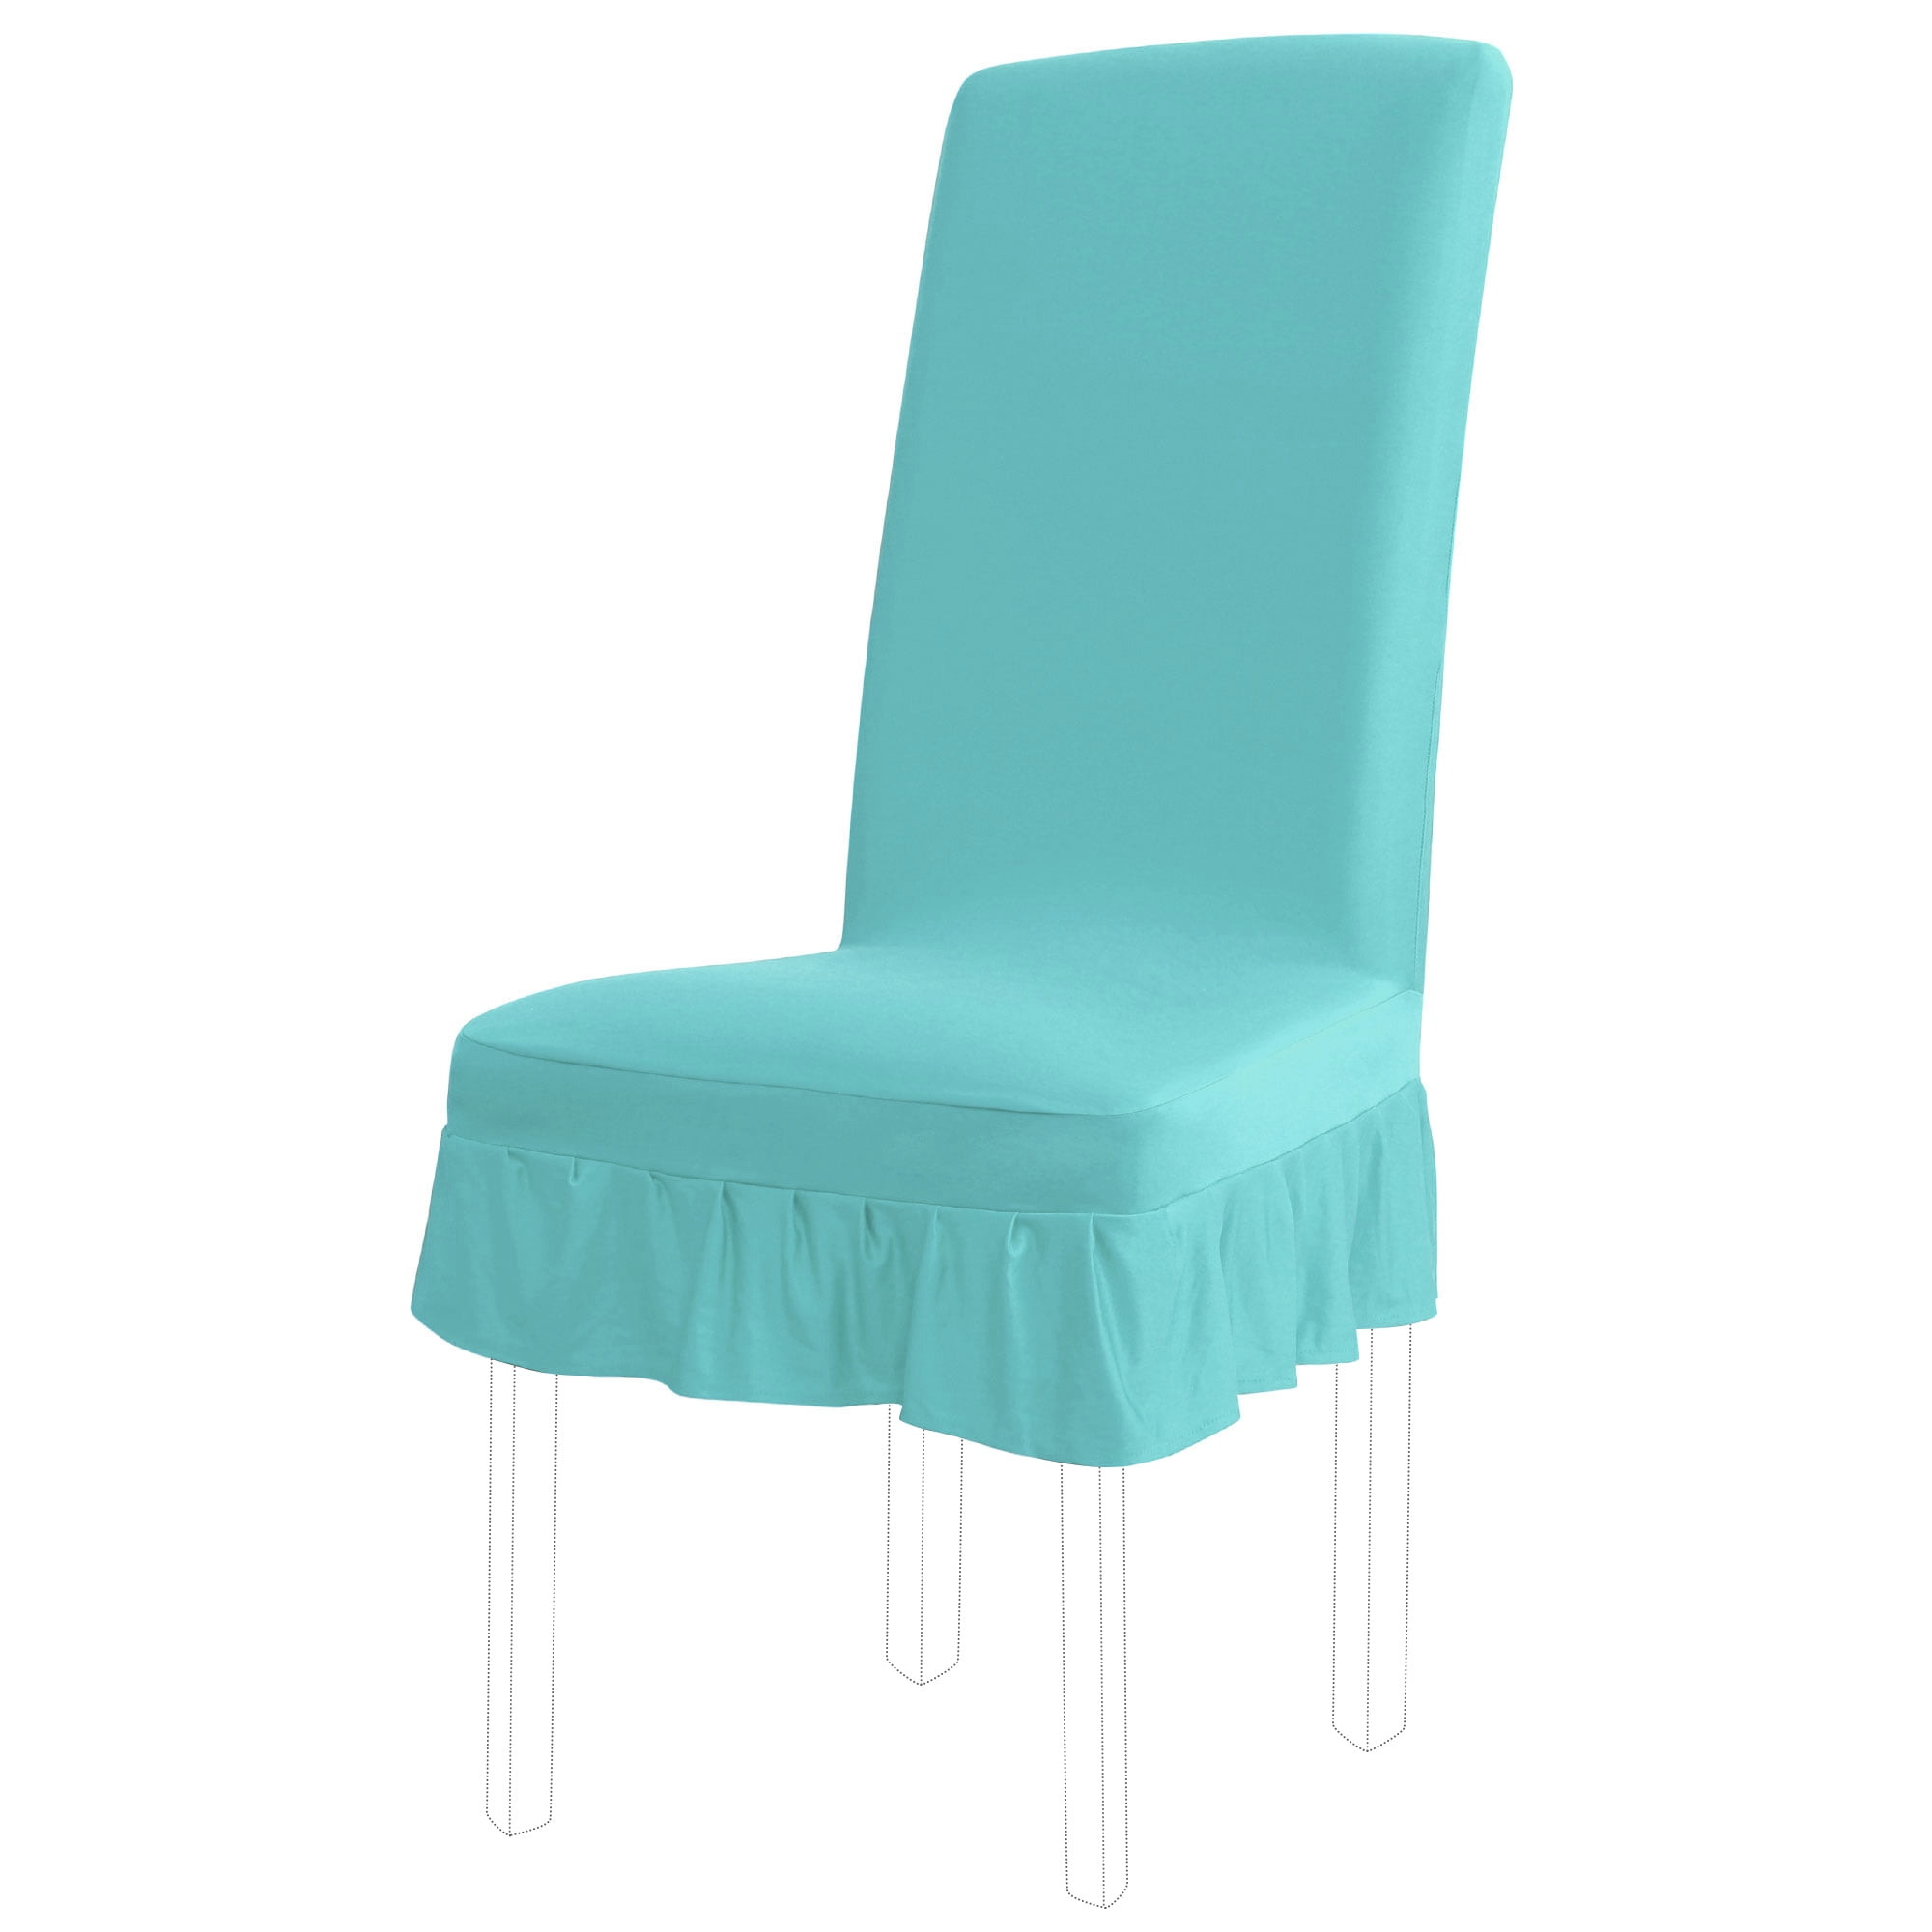 Plain Dyed Chair Covers High Quality Materials Breathable Soft Spandex Cover New 